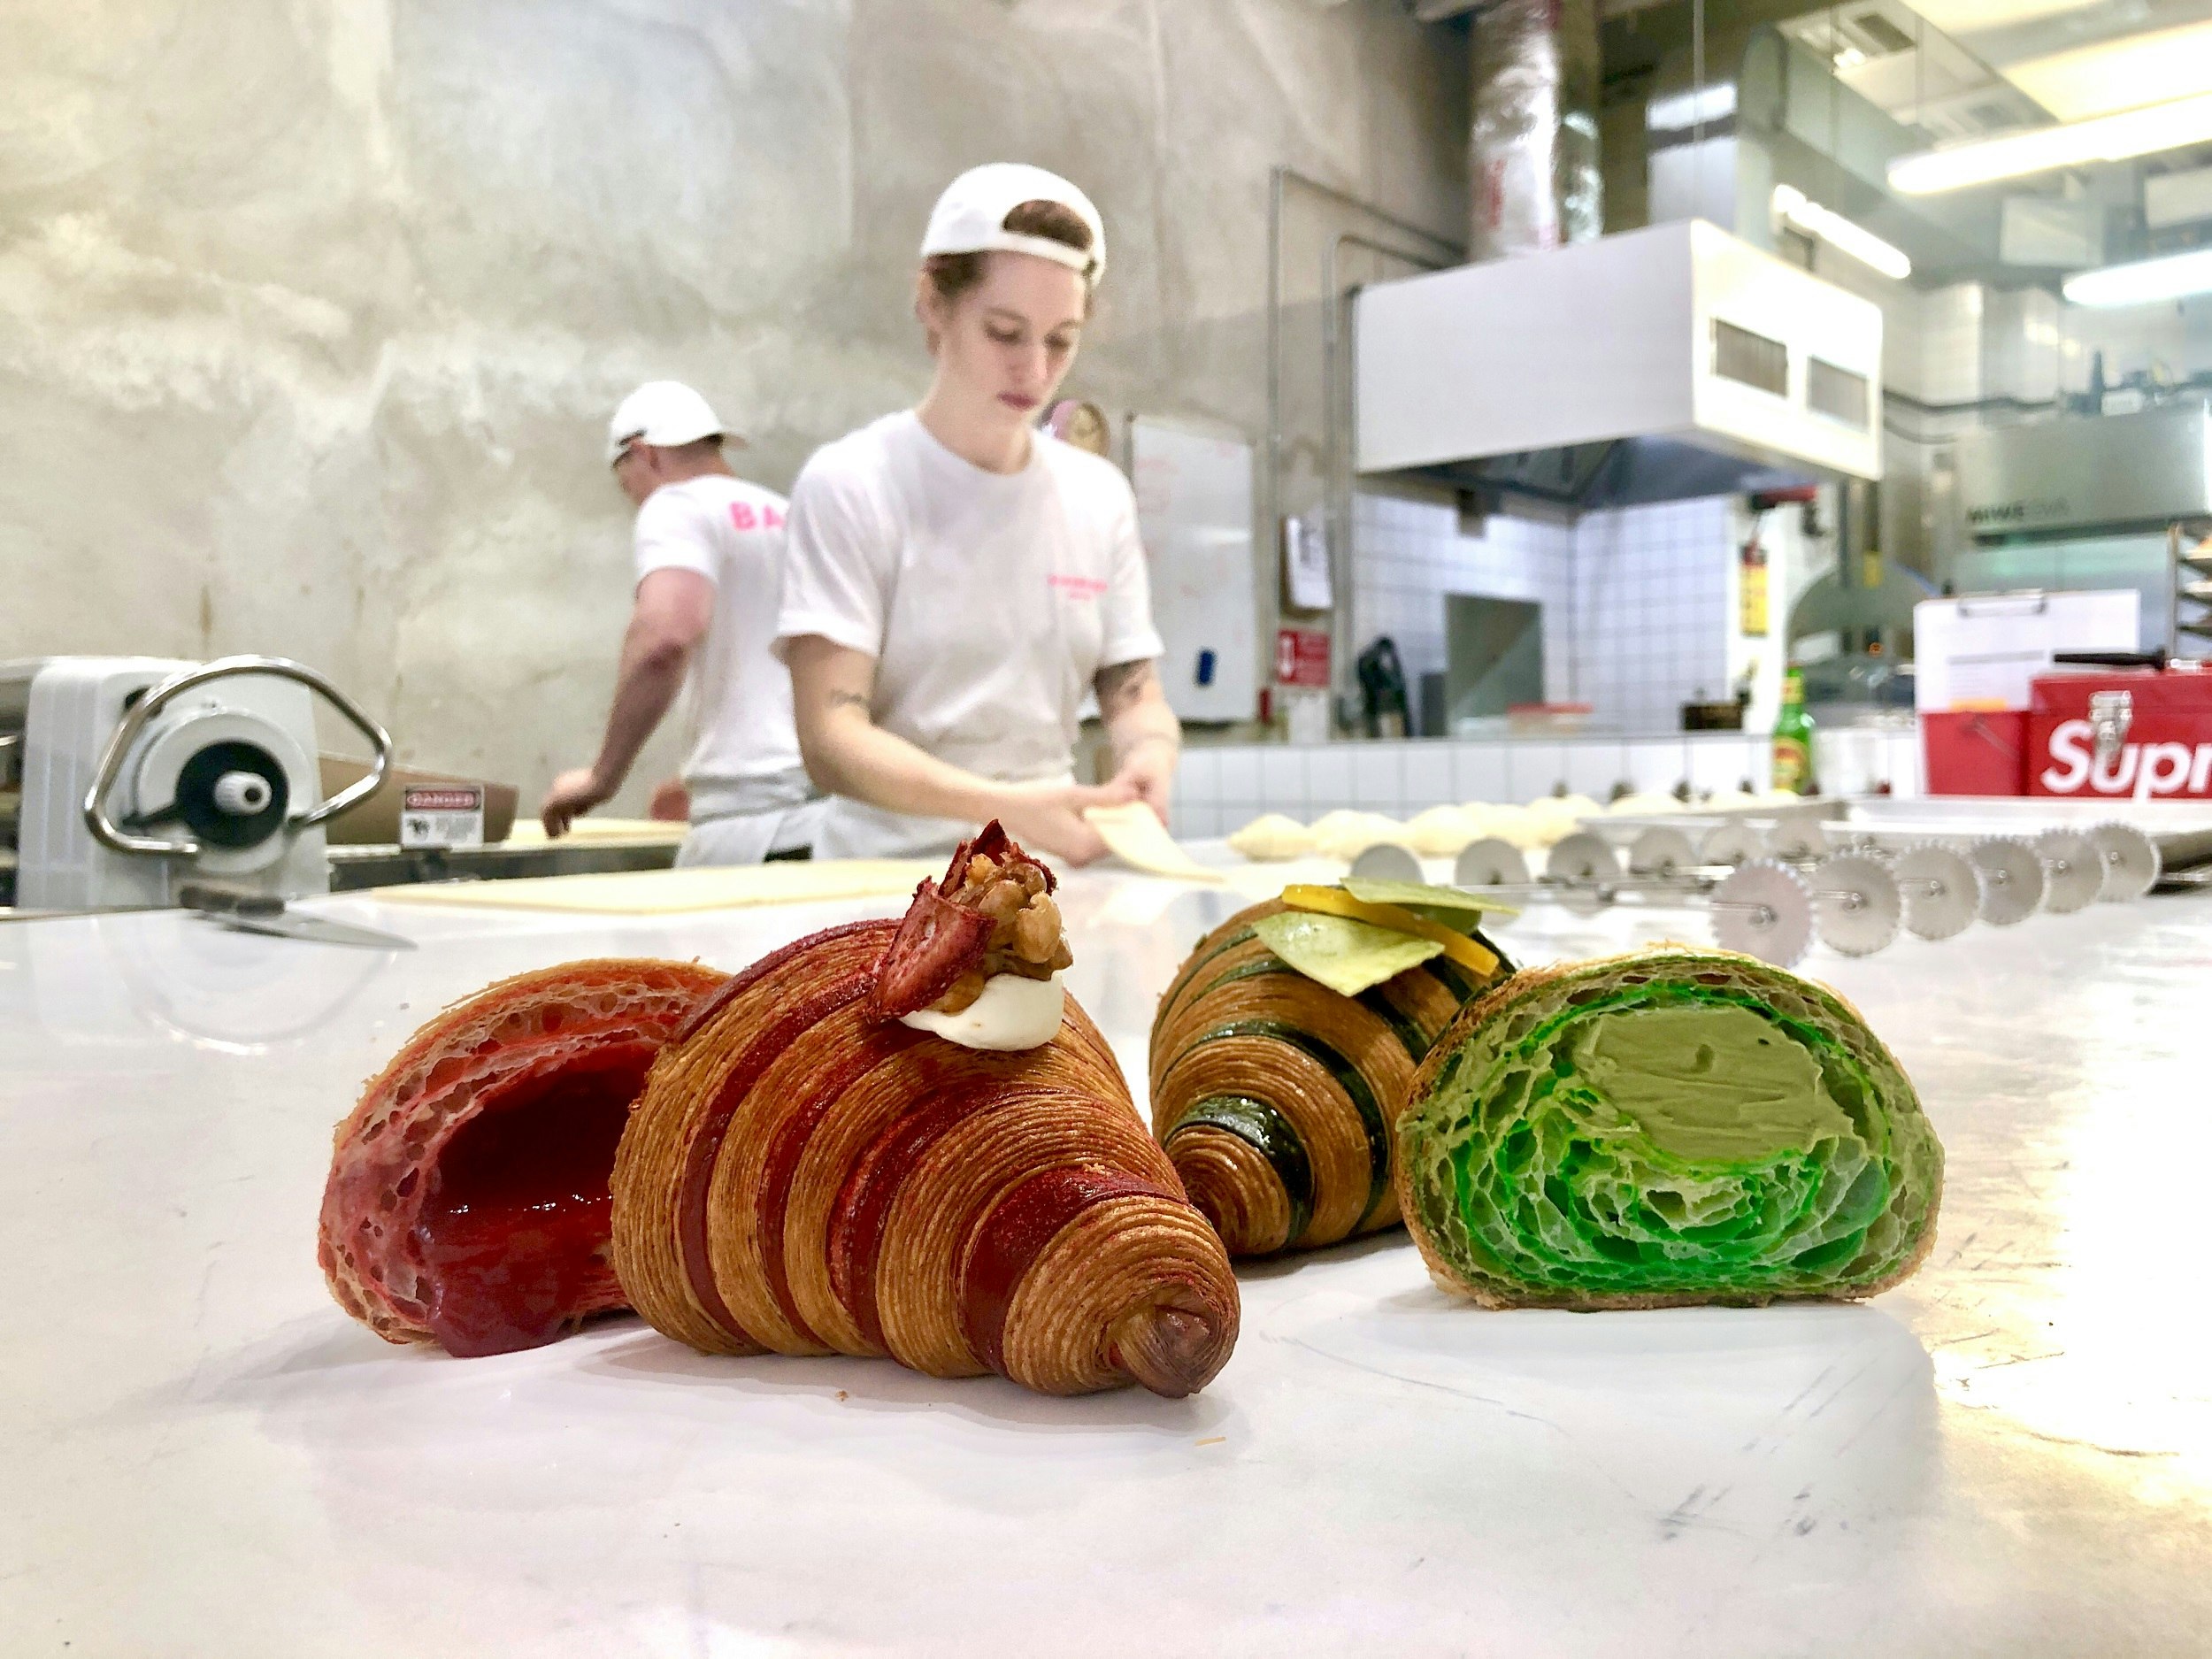 A close-up of two croissants cut in half. One has a red liquid inside, the other is green pastry. Two pastry chefs wearing white t-shirts and hats are working in the background